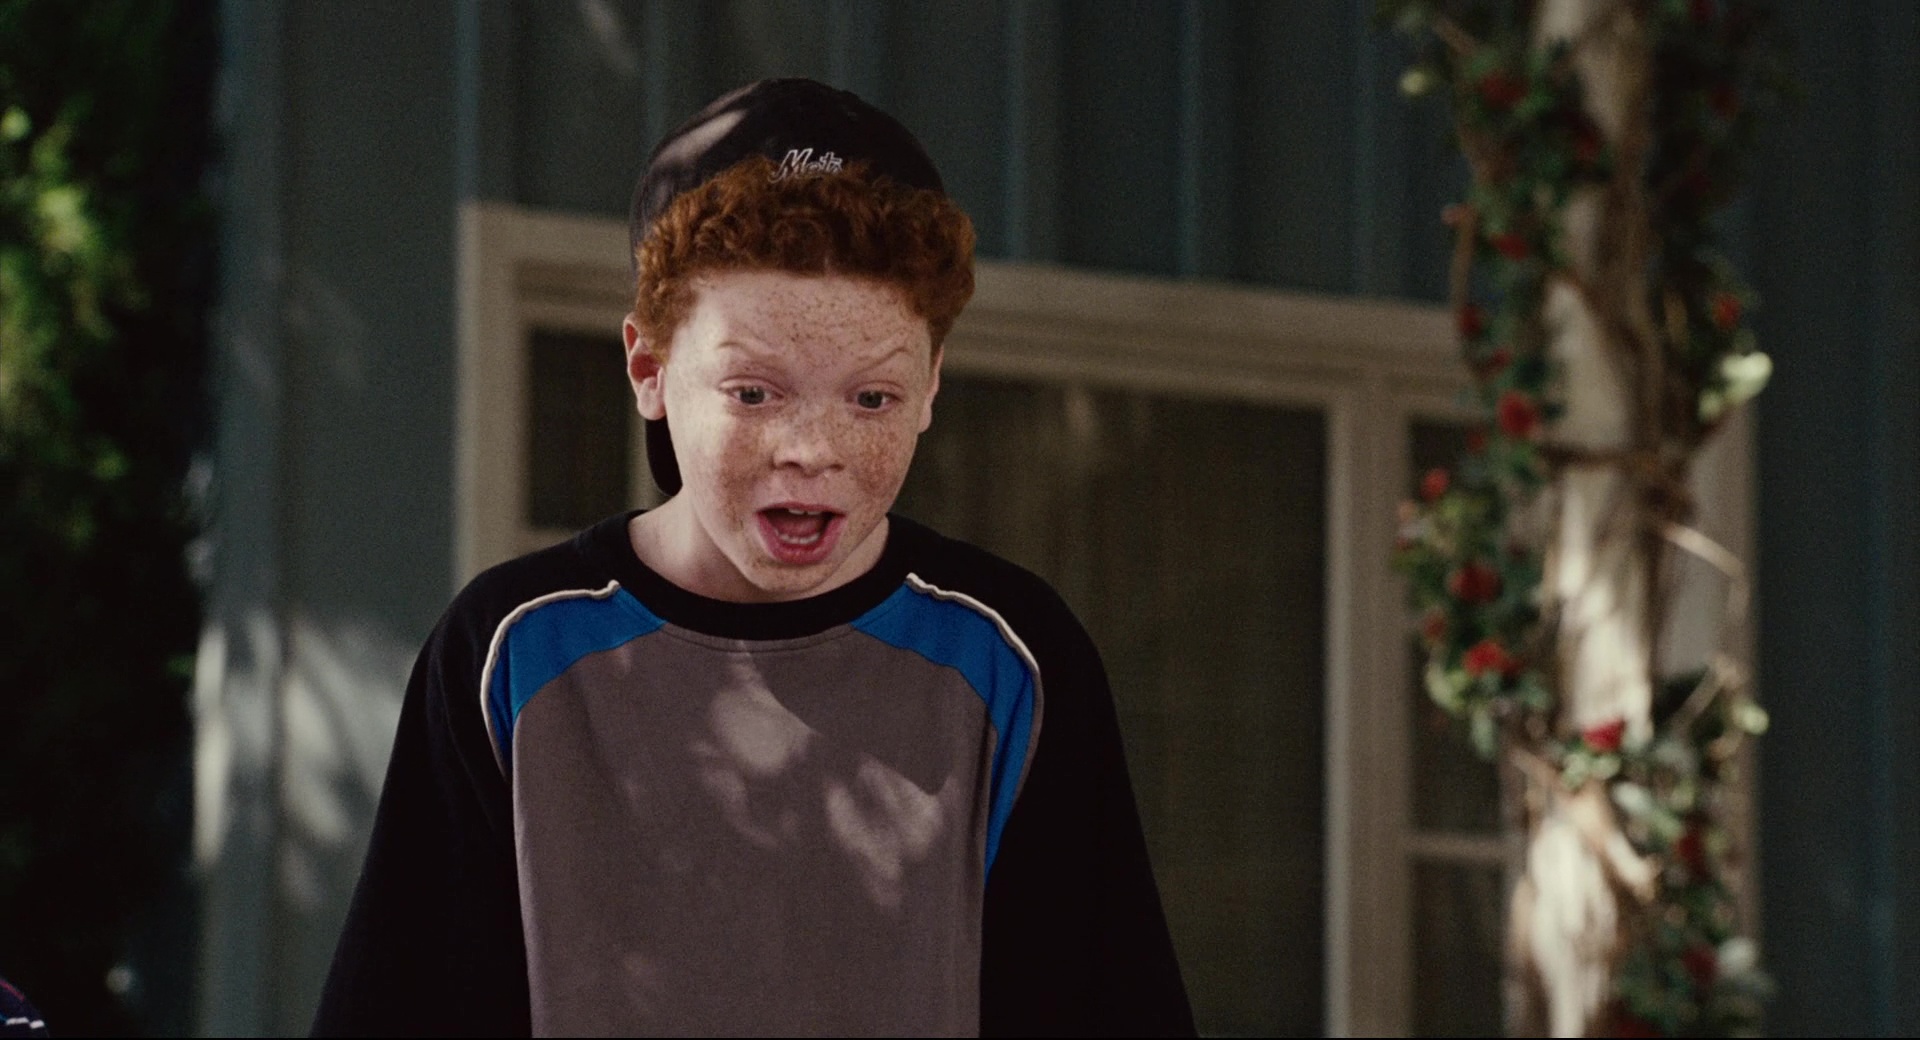 New York Mets Cap Worn by Cameron Monaghan in Click (2006) Movie1920 x 1040